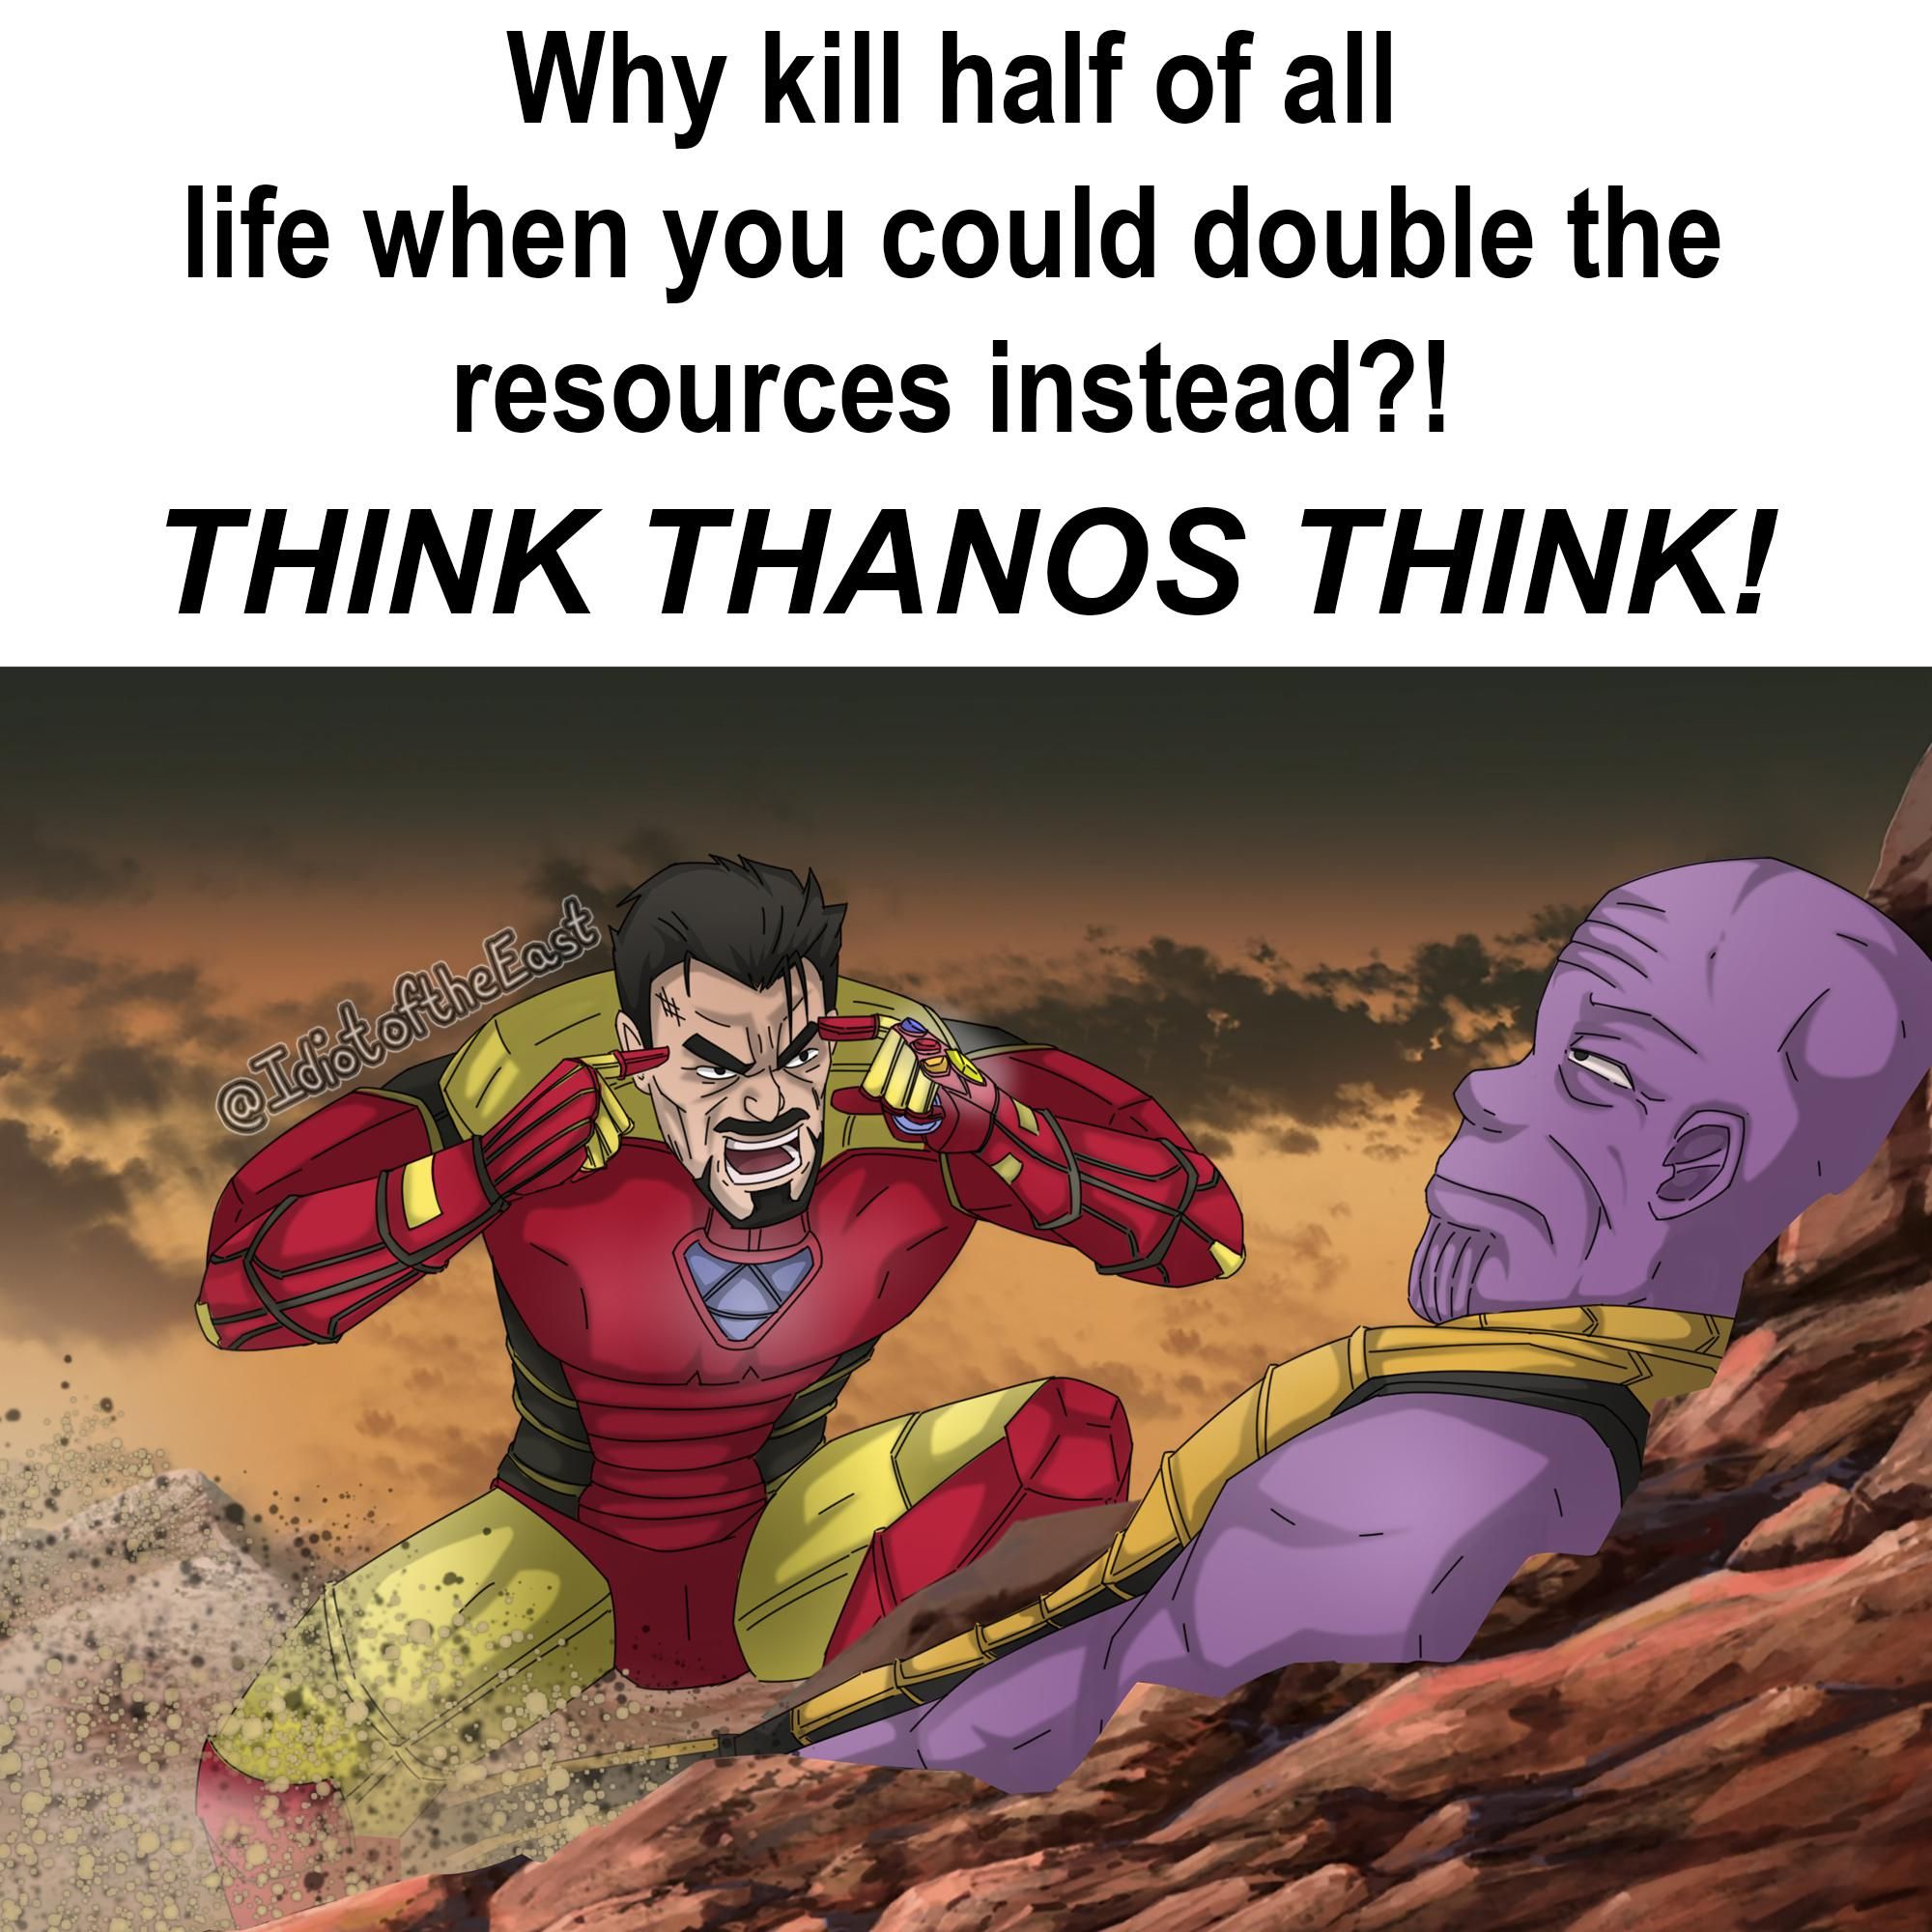 Thanos did it for Death